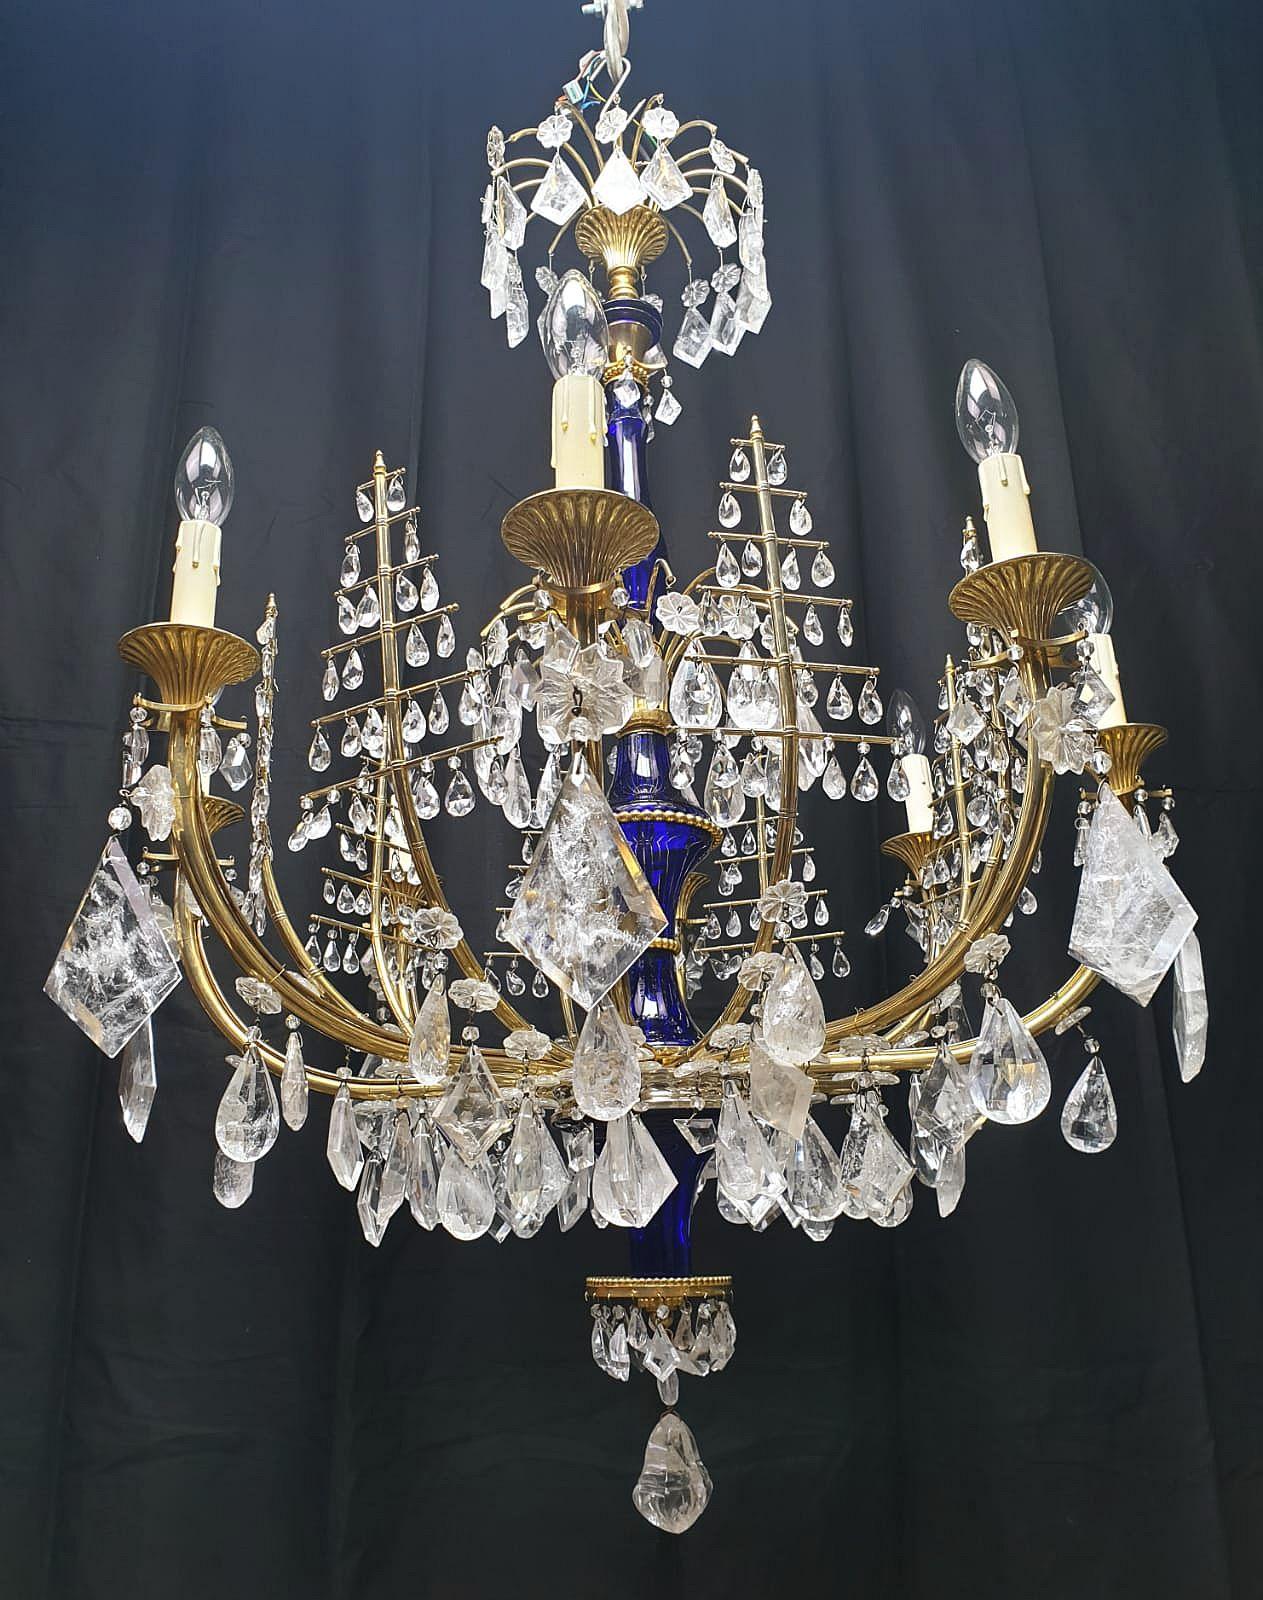 Very sophisticated, elegant neoclassical eight-armed rock crystal chandelier with a cobalt glass baluster. Between its arms are eight rock crystal hangings in form of trees. Northeastern European chandeliers have a characteristic lightness between